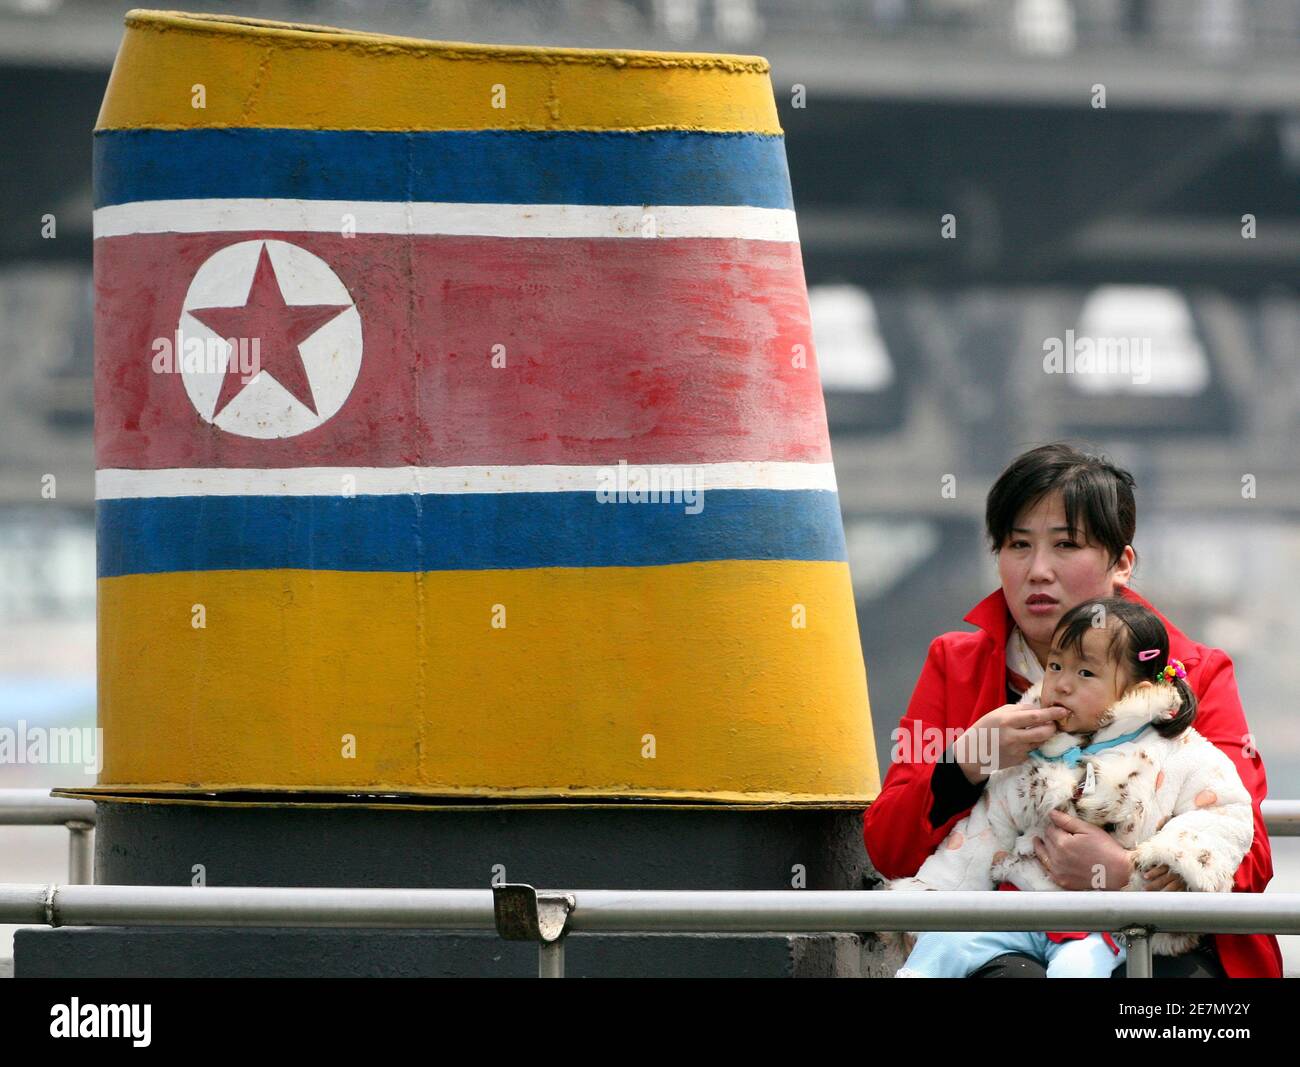 A North Korean woman feeds a baby while touring on a boat to celebrate May Day in the Yalu River near the Chinese border city of Dandong May 1, 2010. REUTERS/Jacky Chen (CHINA - Tags: SOCIETY TRAVEL BUSINESS EMPLOYMENT) Stock Photo